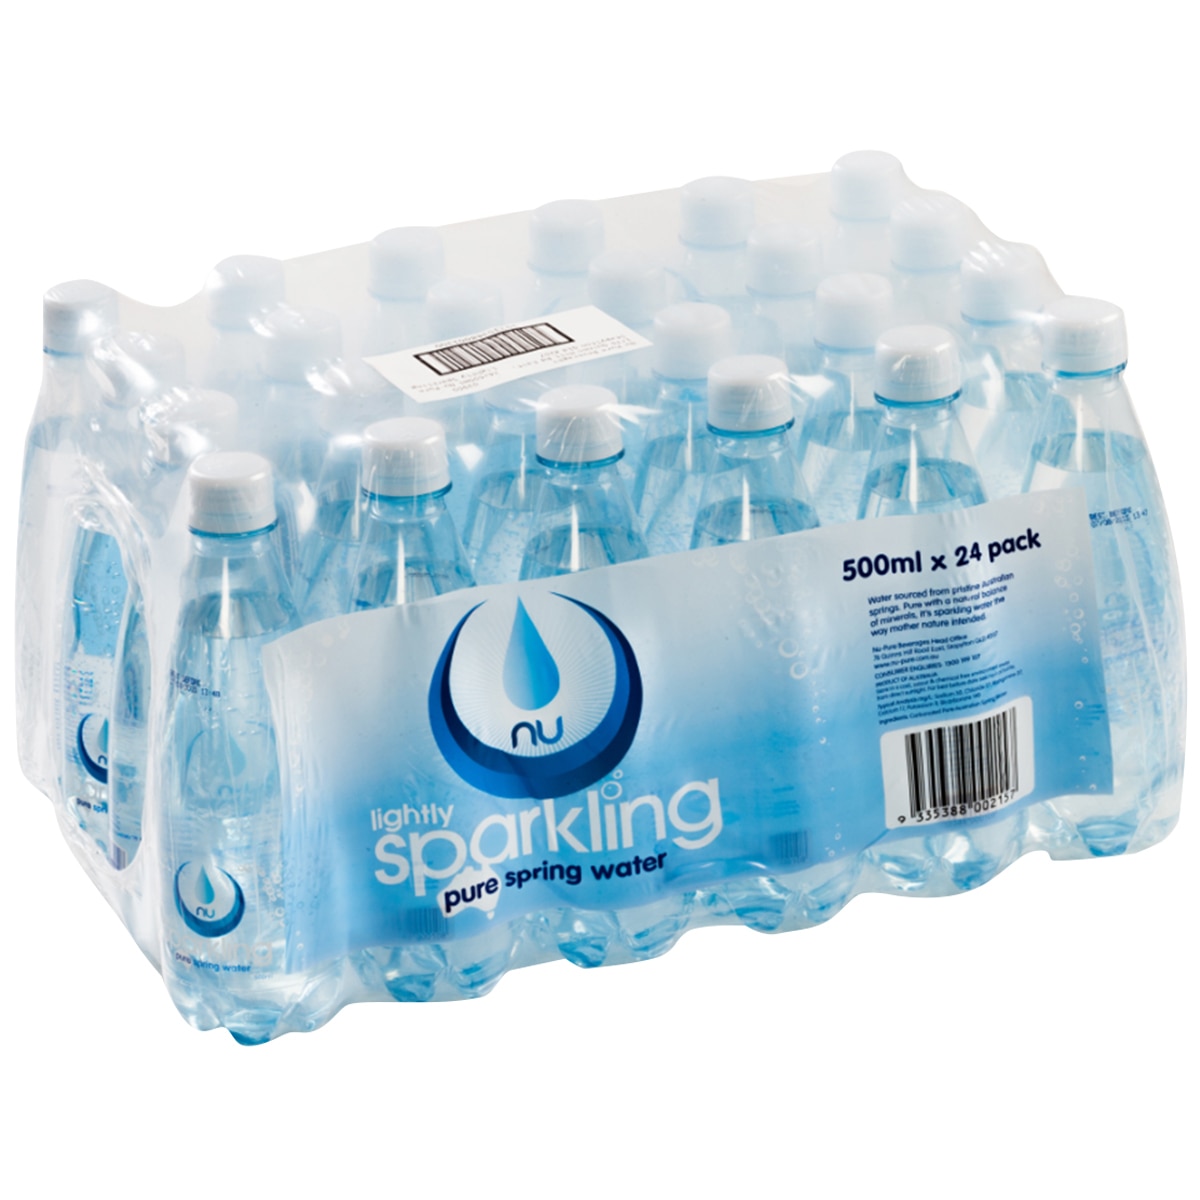 Nupure Sparkling Water 24x500ml